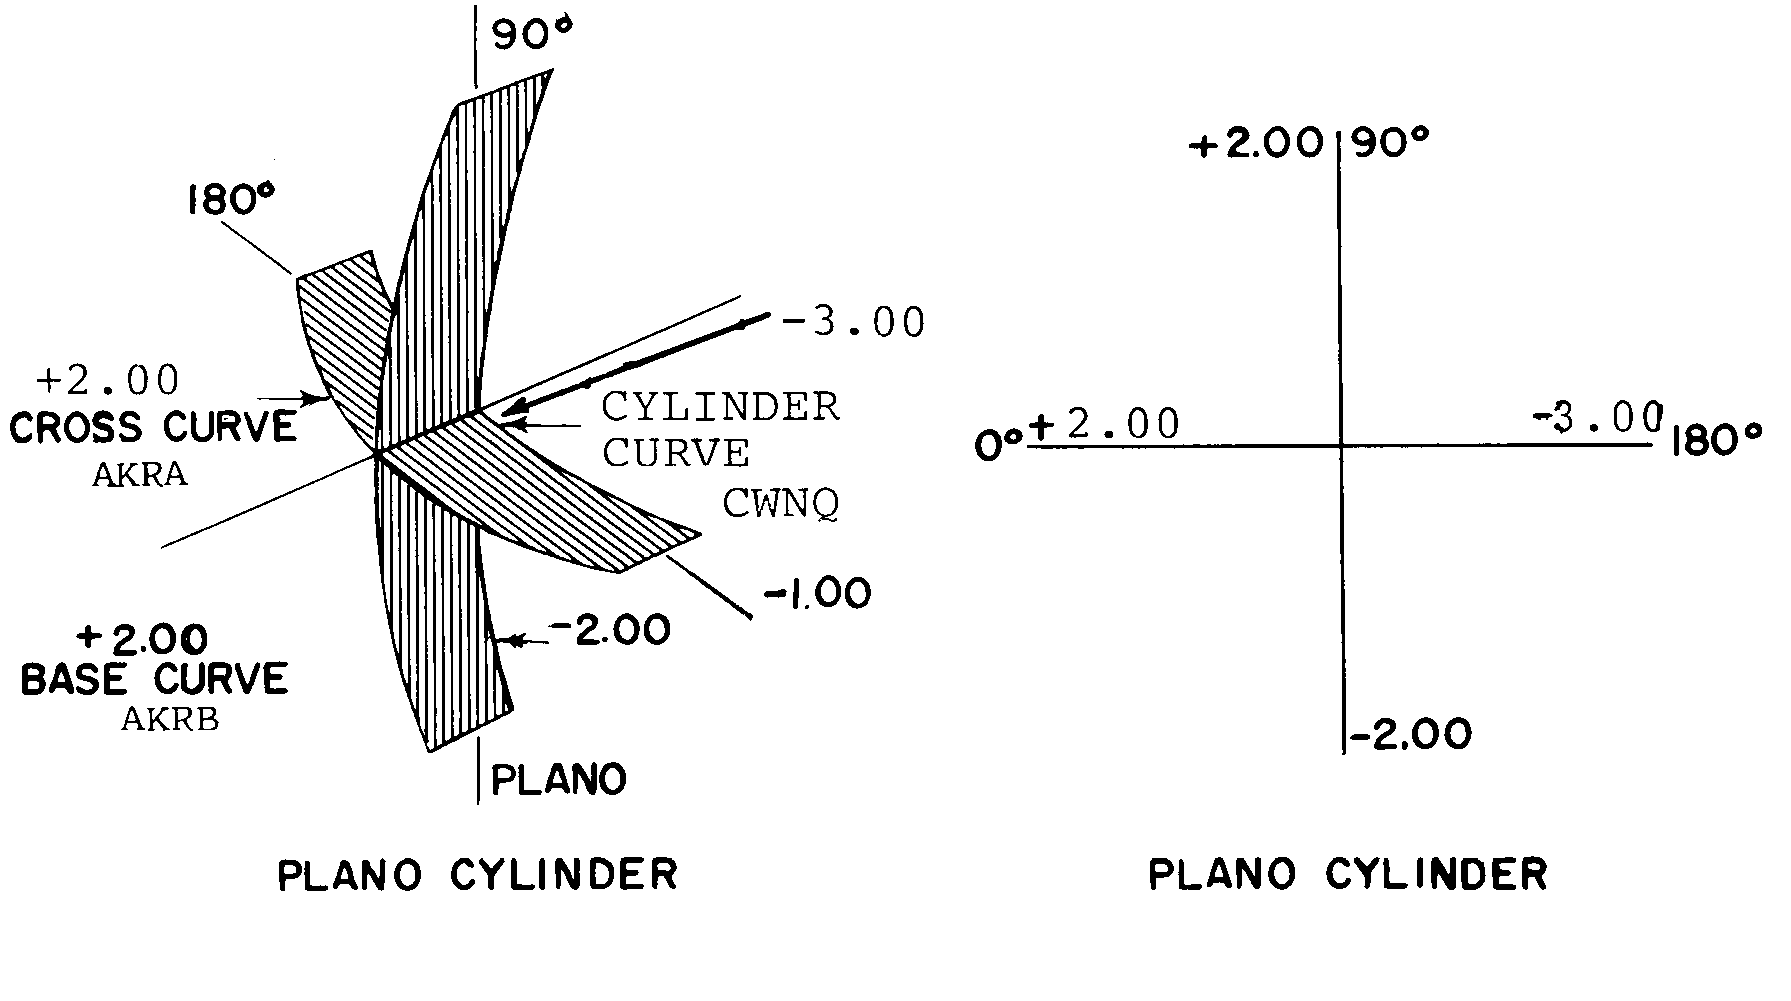 PLANO CYLINDER style nsn 6540-01-102-4296